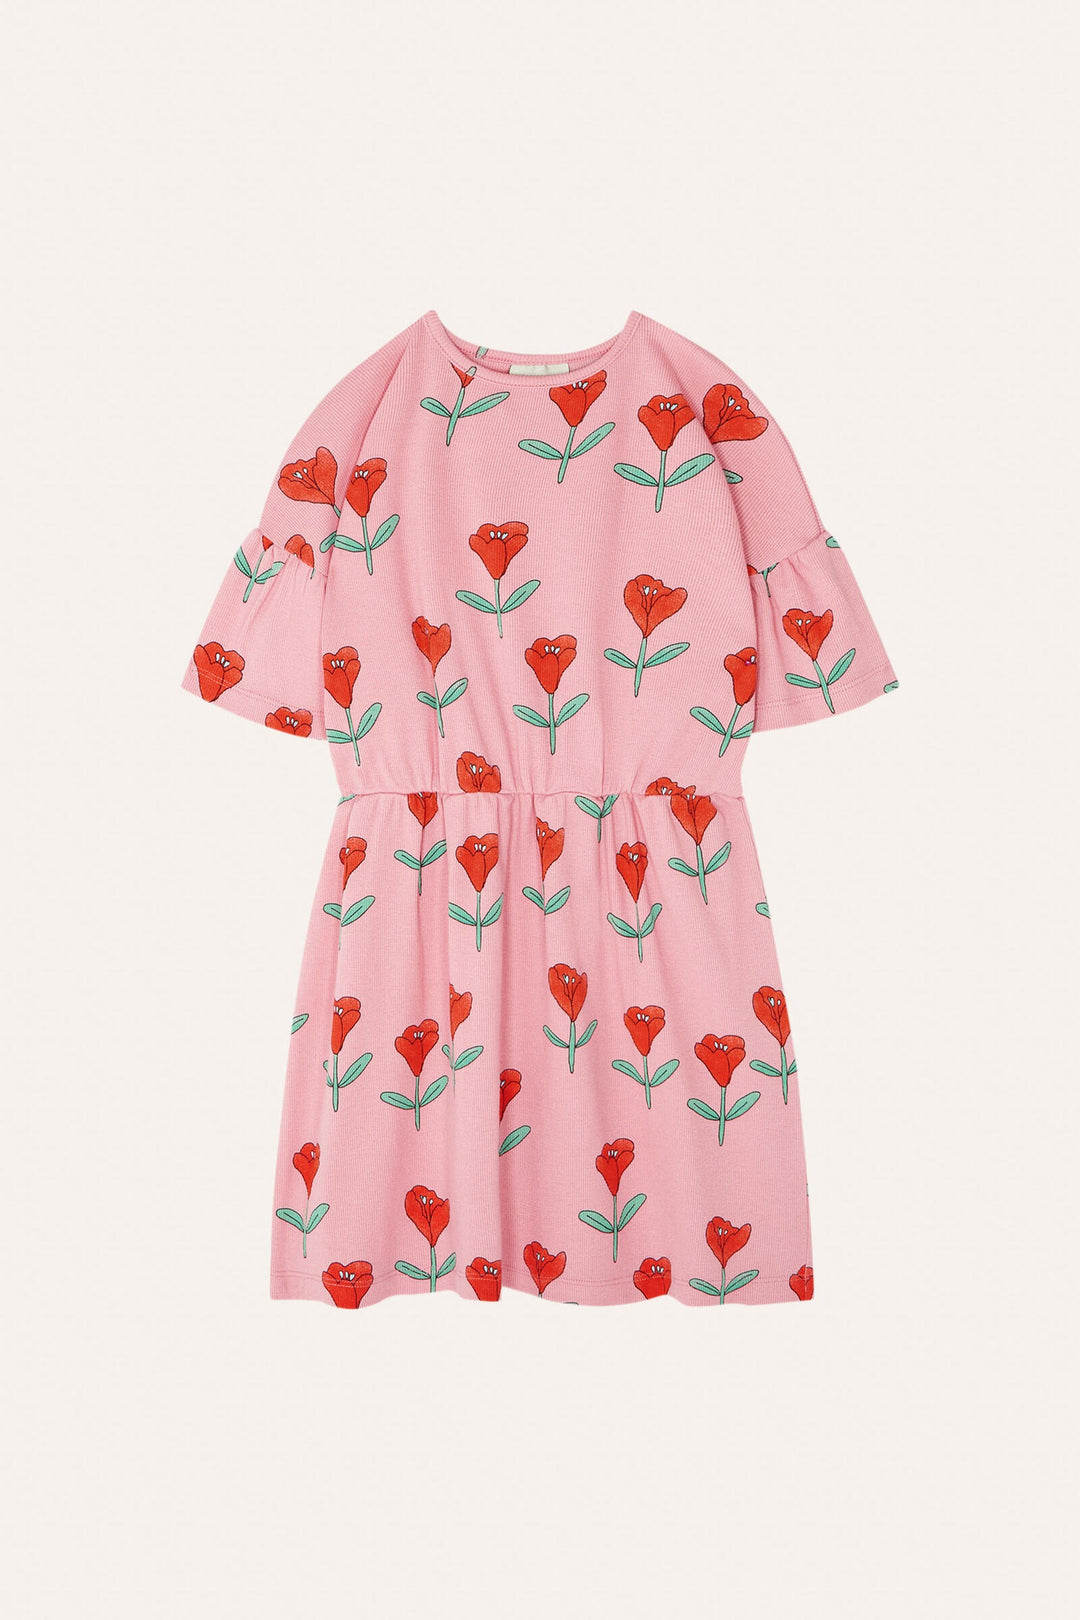 TULIPS ALLOVER PINK DRESS-Pink